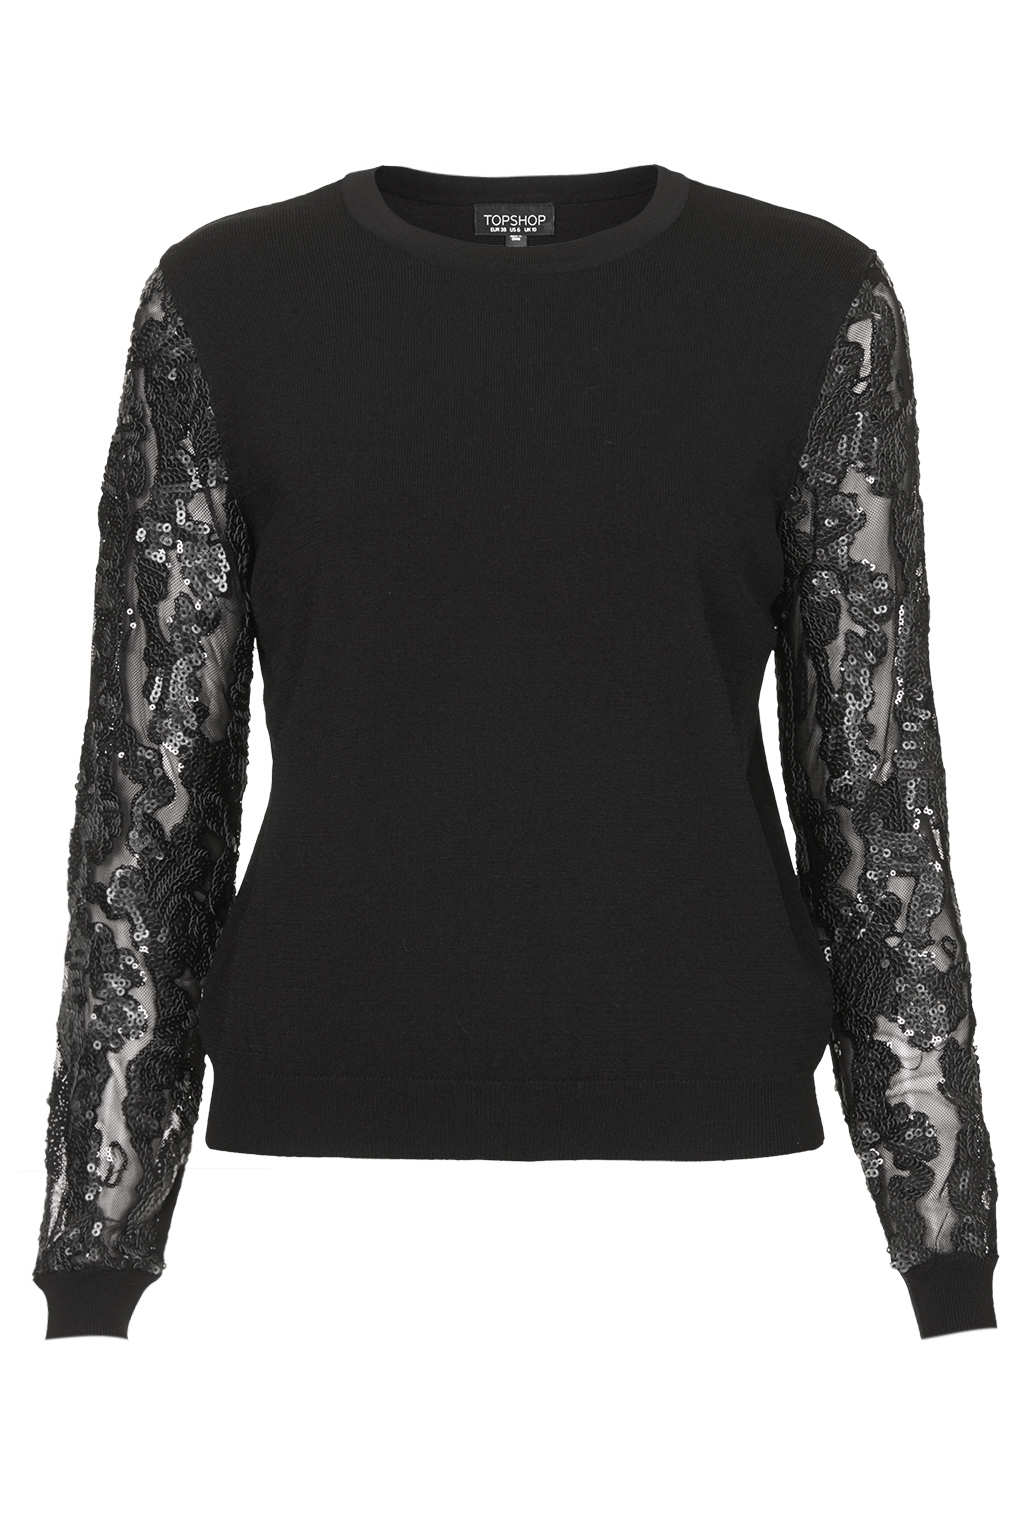 Lyst - Topshop Knitted Sequin Sleeve Jumper in Black